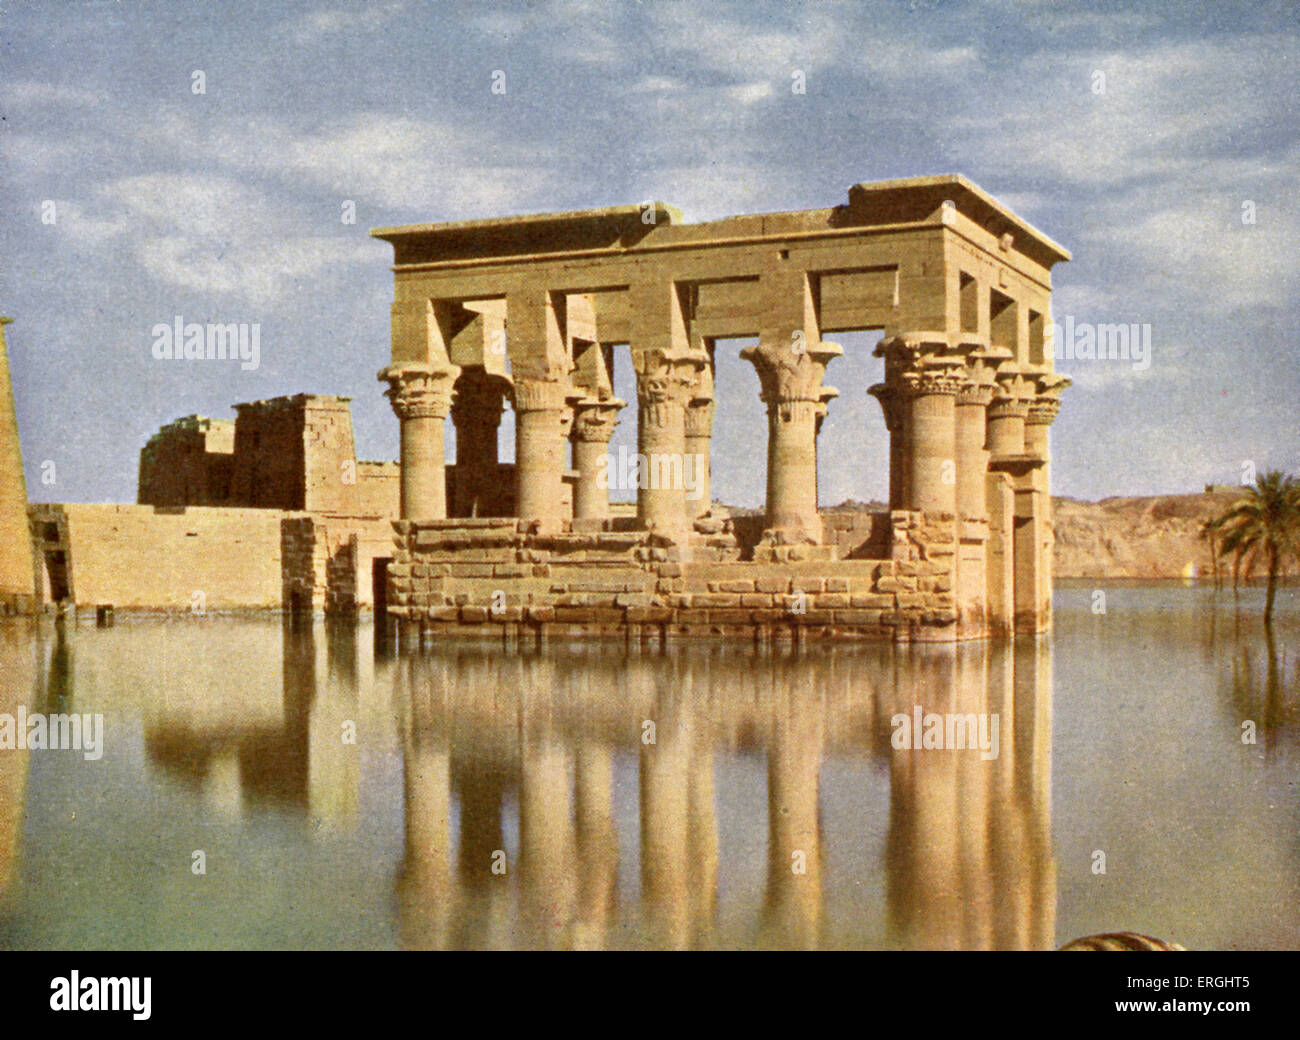 The Temple of Trajan, on the Island of Philae, Egypt. Roman temple built in the Forum of Trajan. Stock Photo